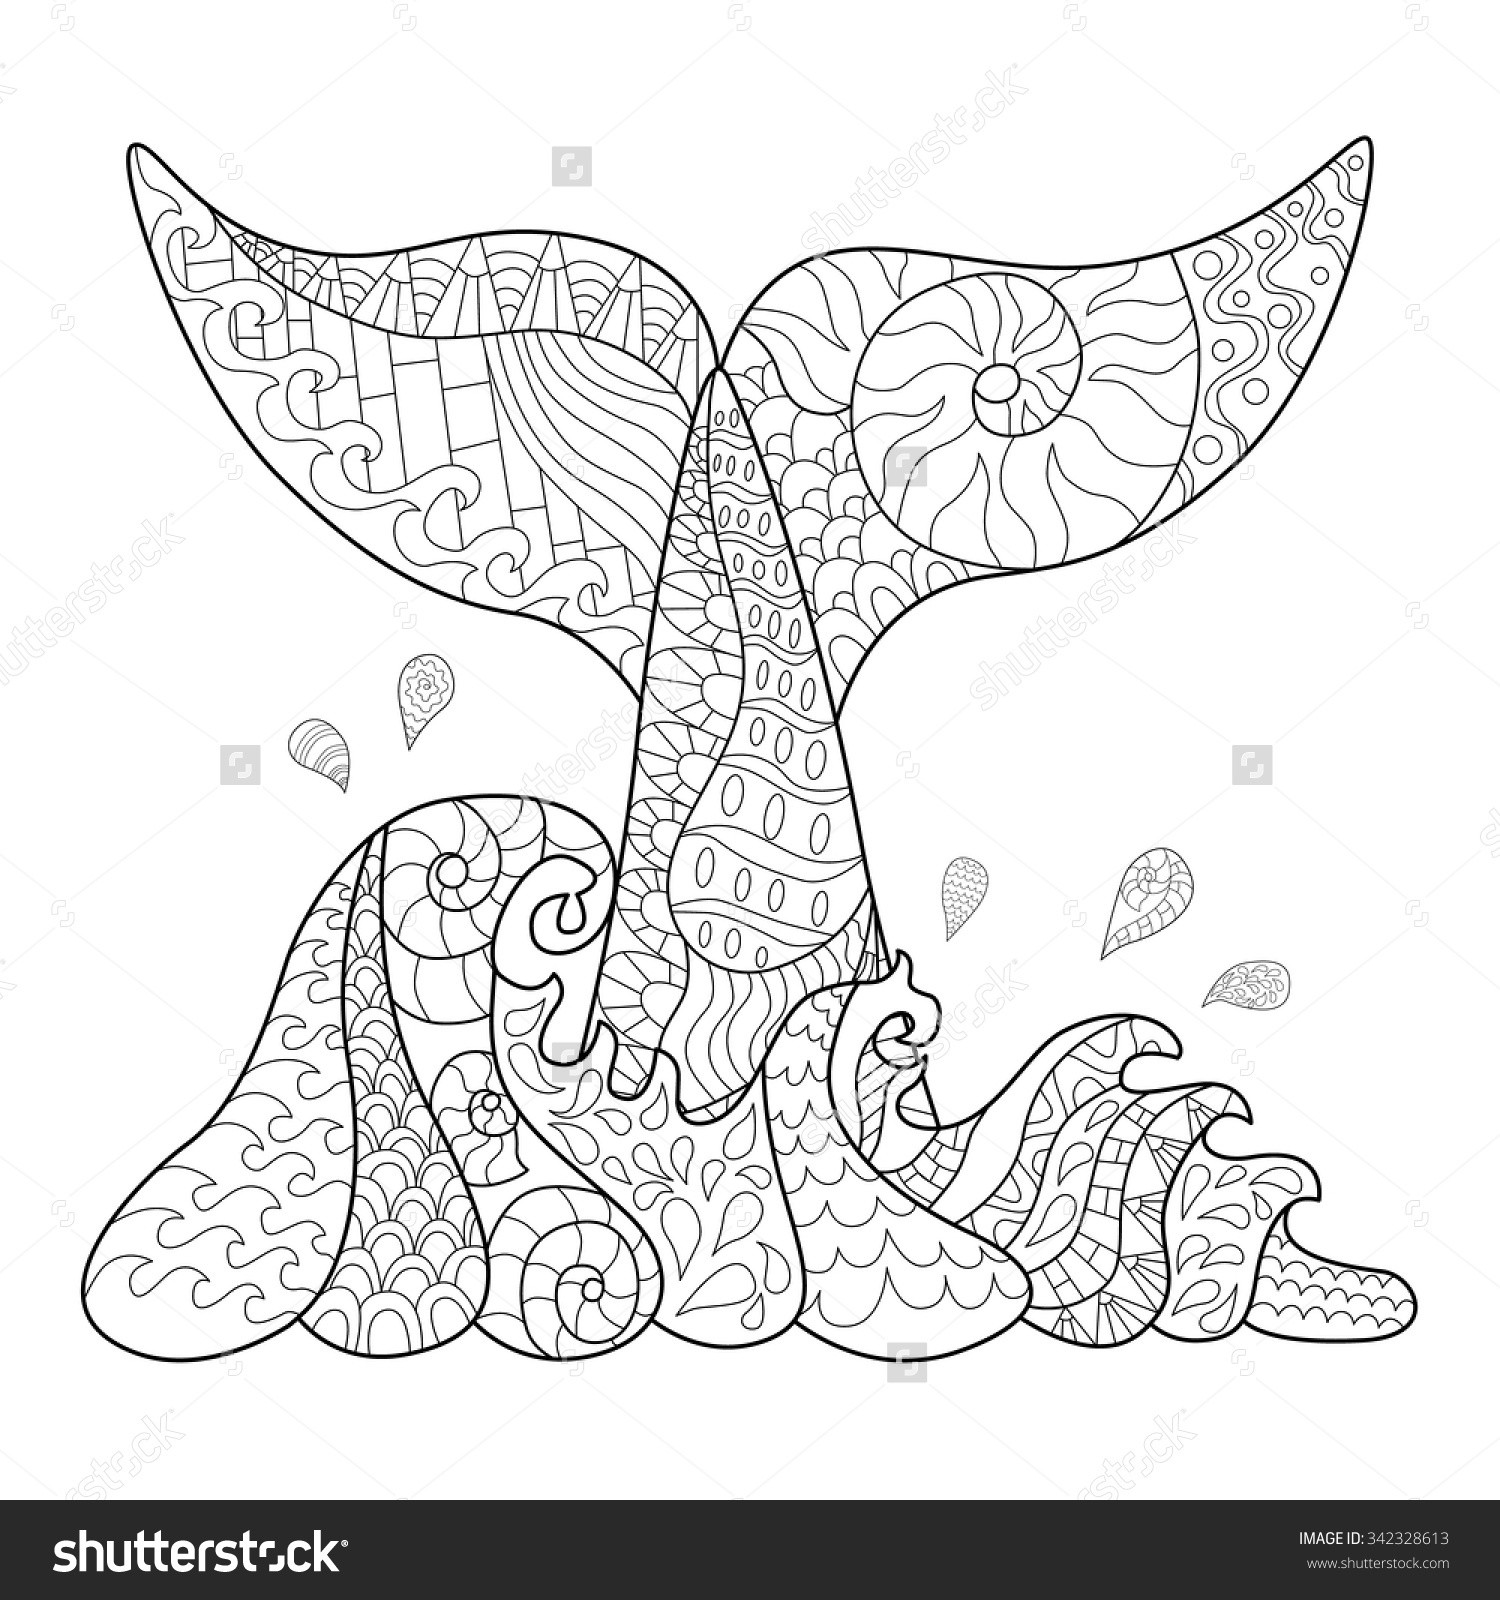 Ocean Waves Coloring Pages For Adults
 Drawn wave coloring page Pencil and in color drawn wave